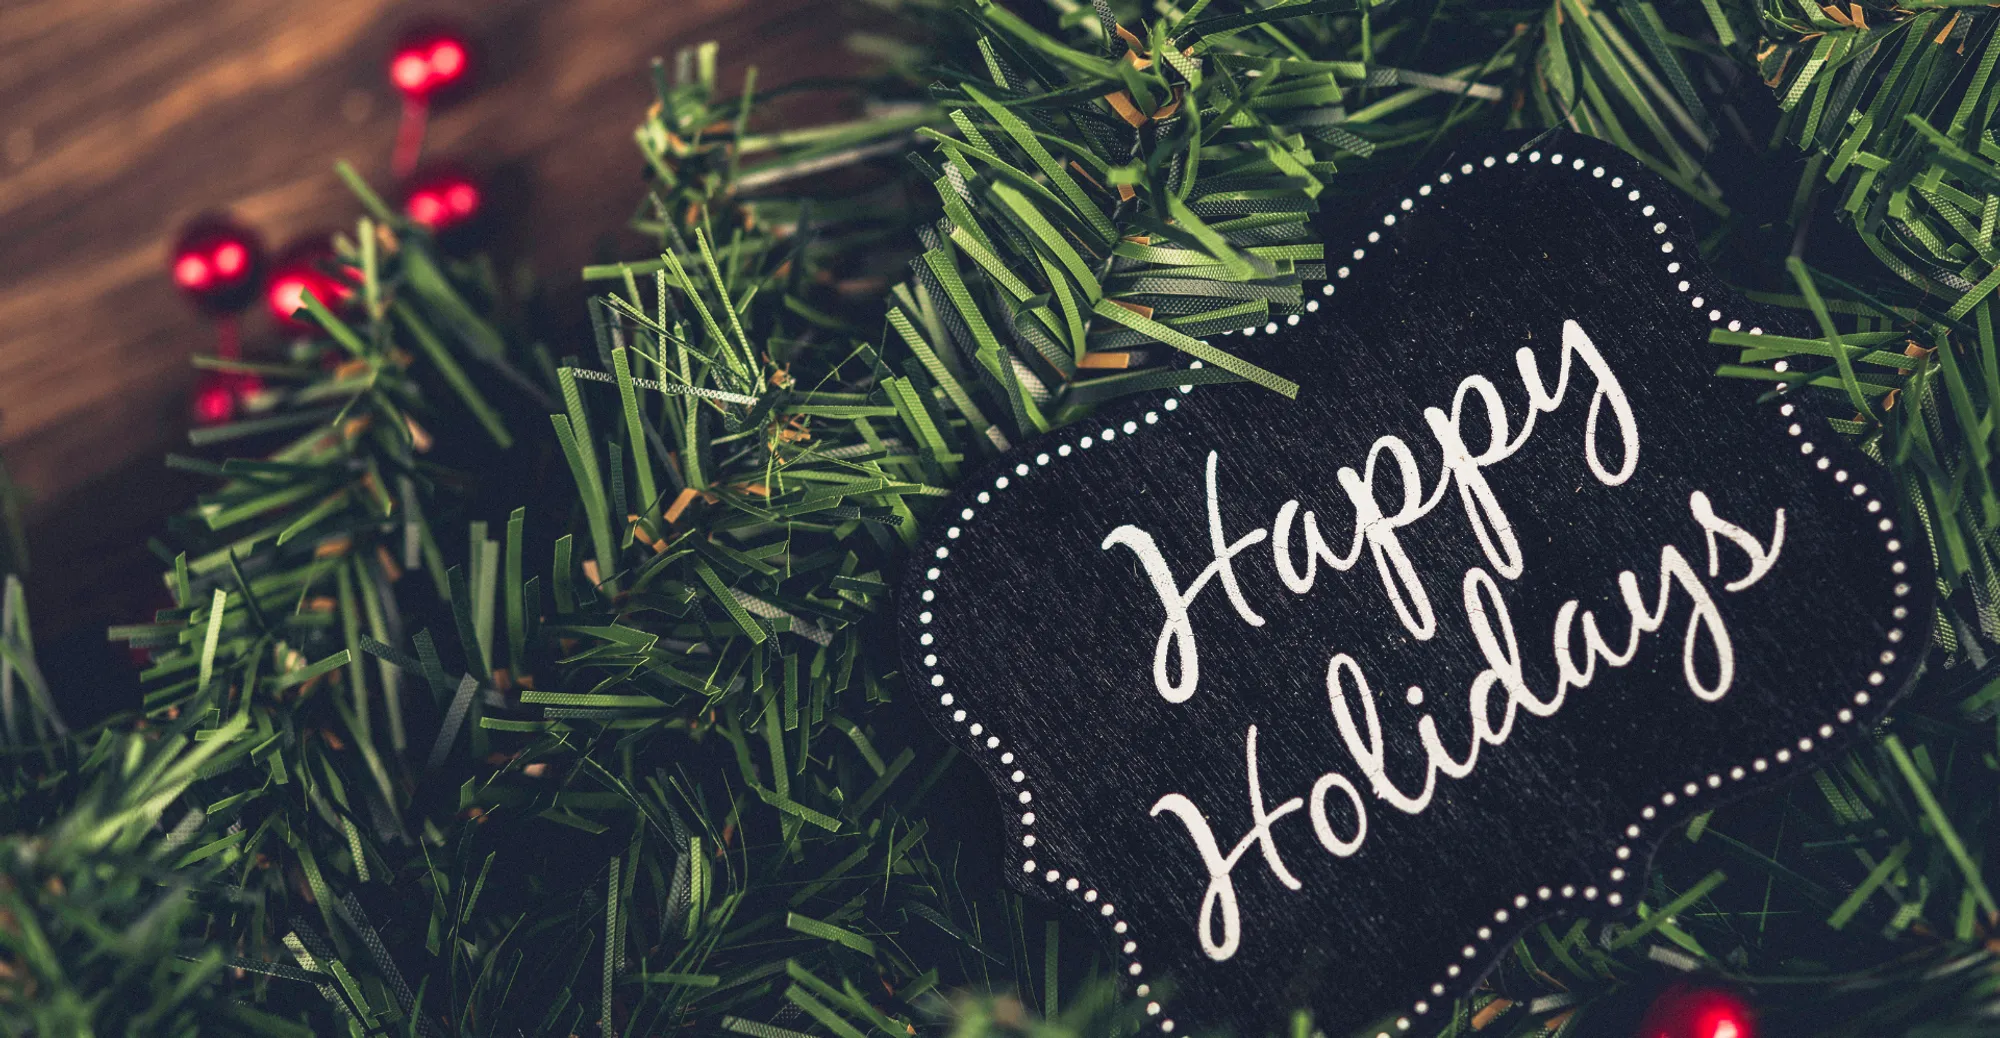 A holiday message from the CEO - Heinen & Hopman